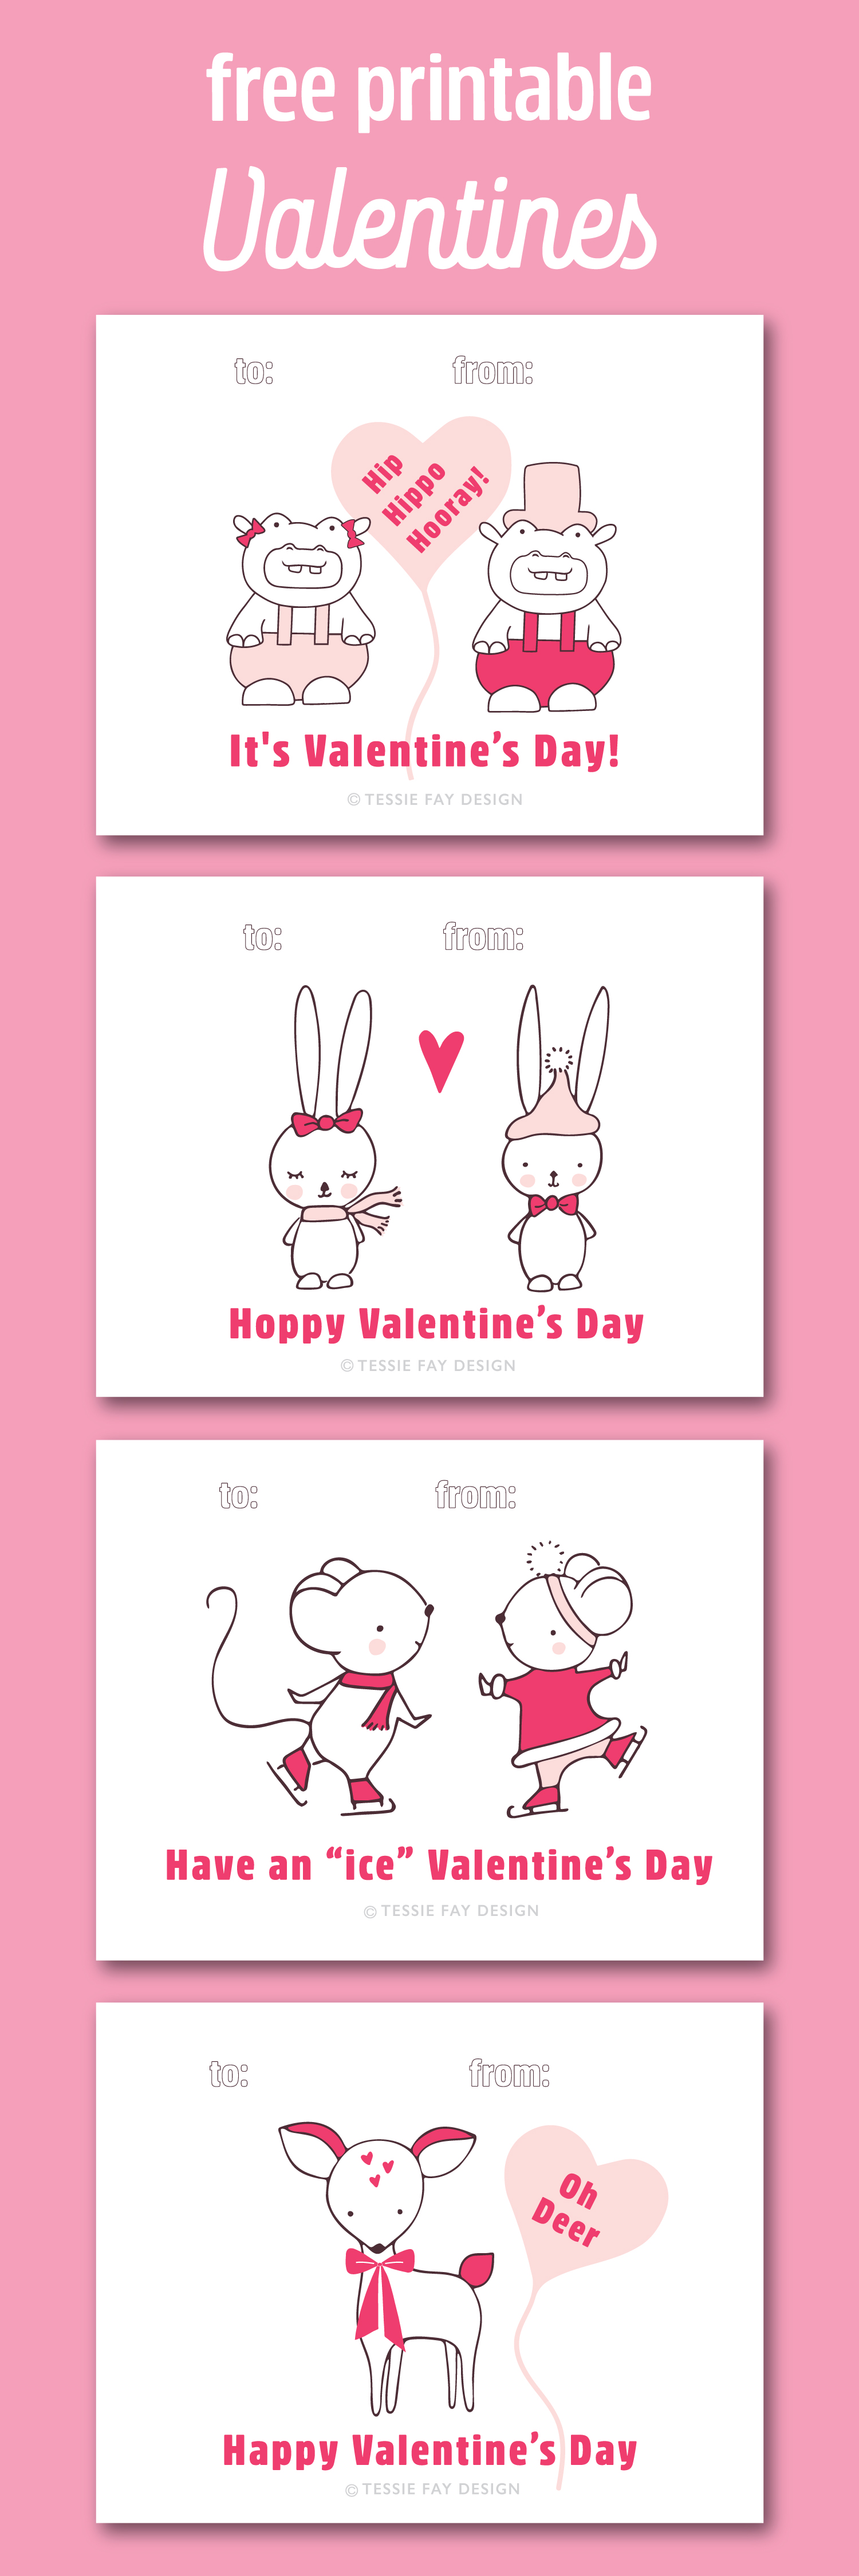 Free Printable Valentines! Animal valentines. Hippo, mice, bunny and dear.